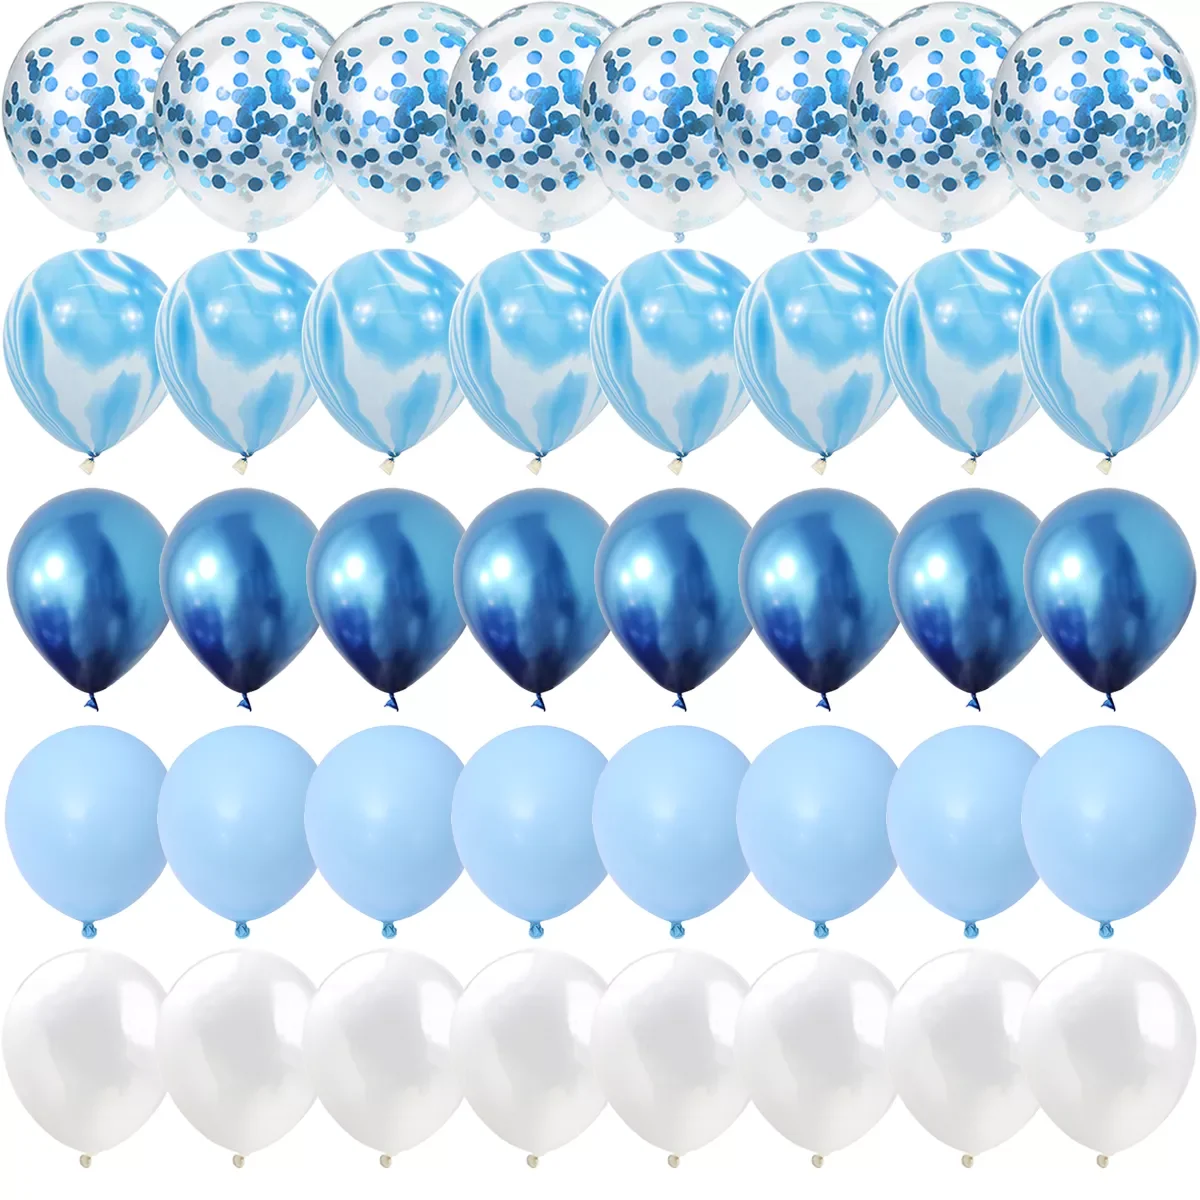 

NEW IN 40 Pcs Blue Set Agate Marble Balloons Silver Confetti Balloon Wedding Valentine's Day Baby Shower Birthday Party Deco